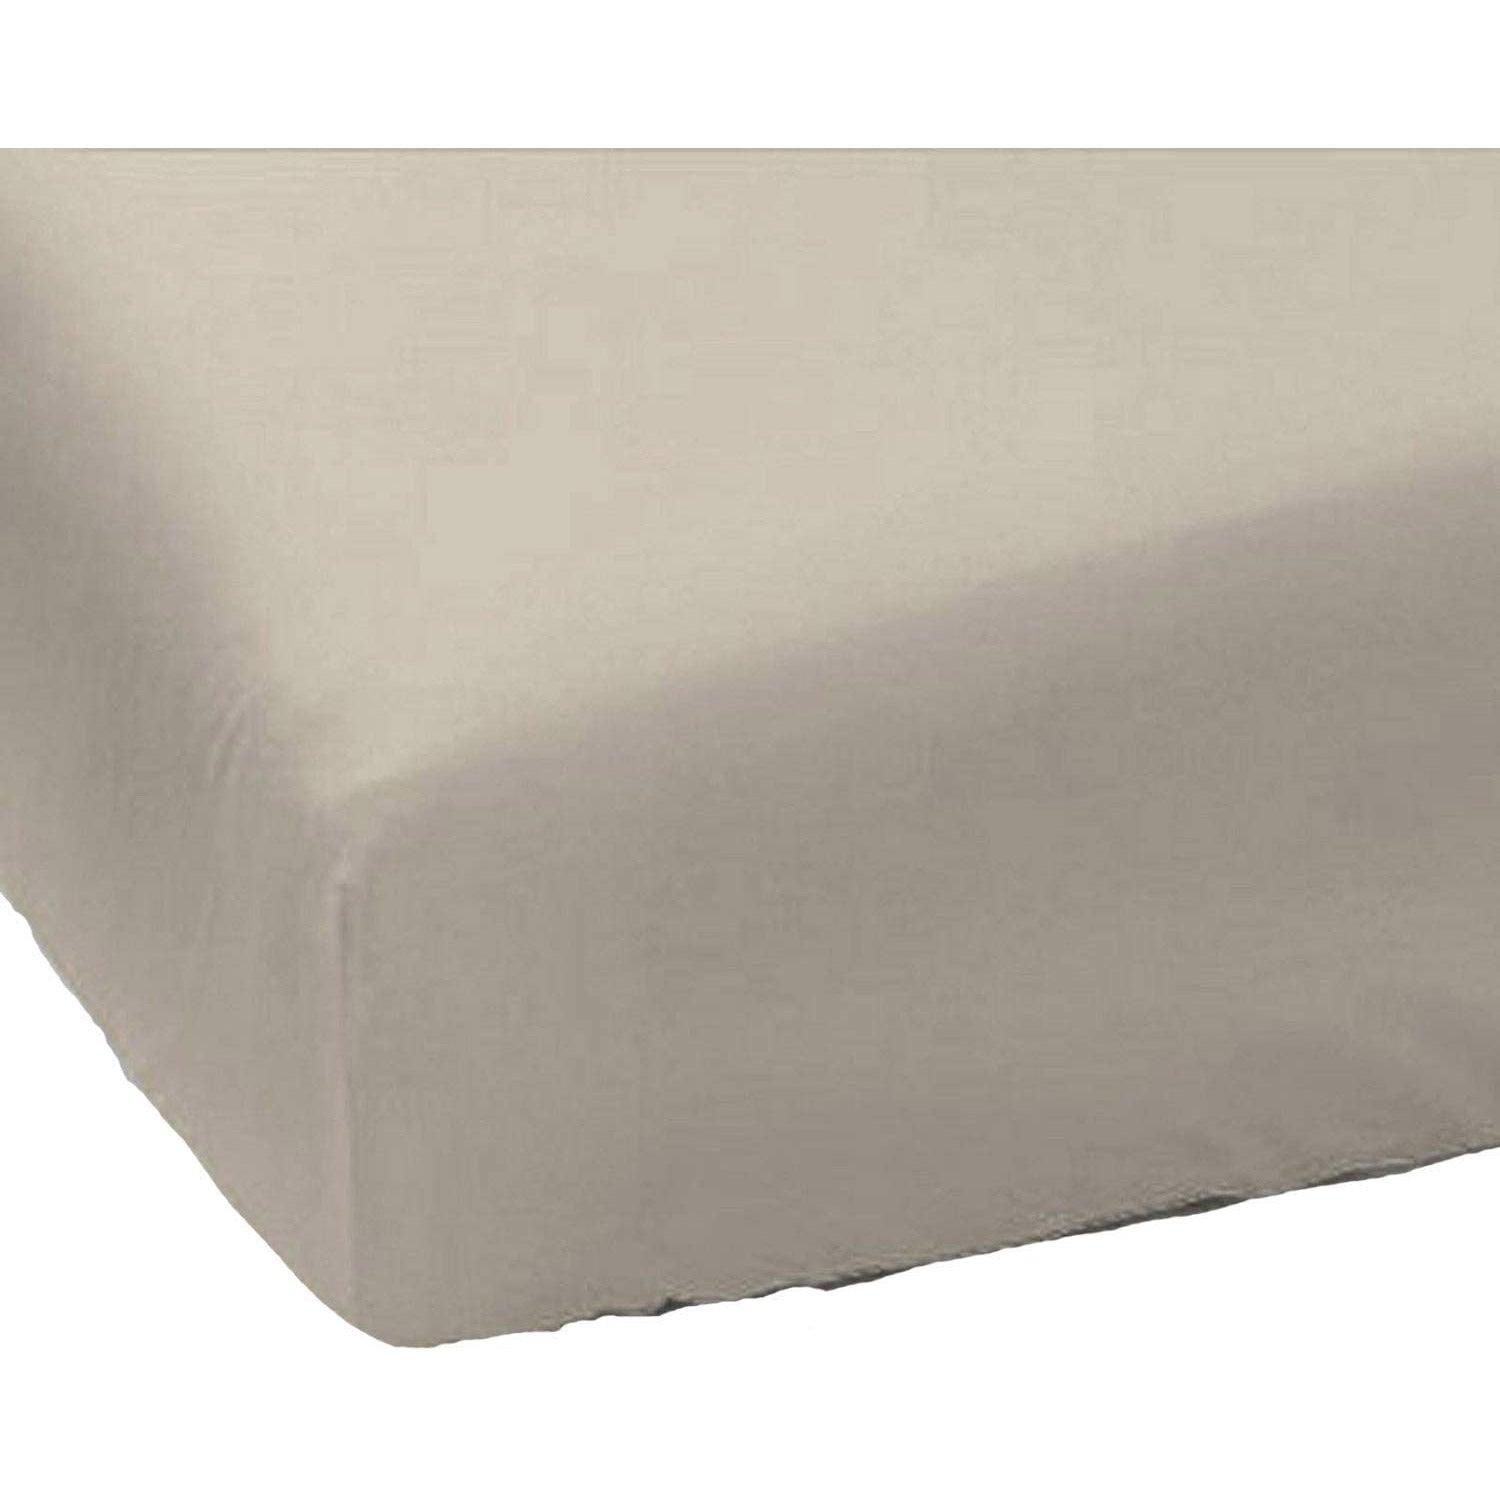 Plain Dyed Polycotton Fitted Sheets 